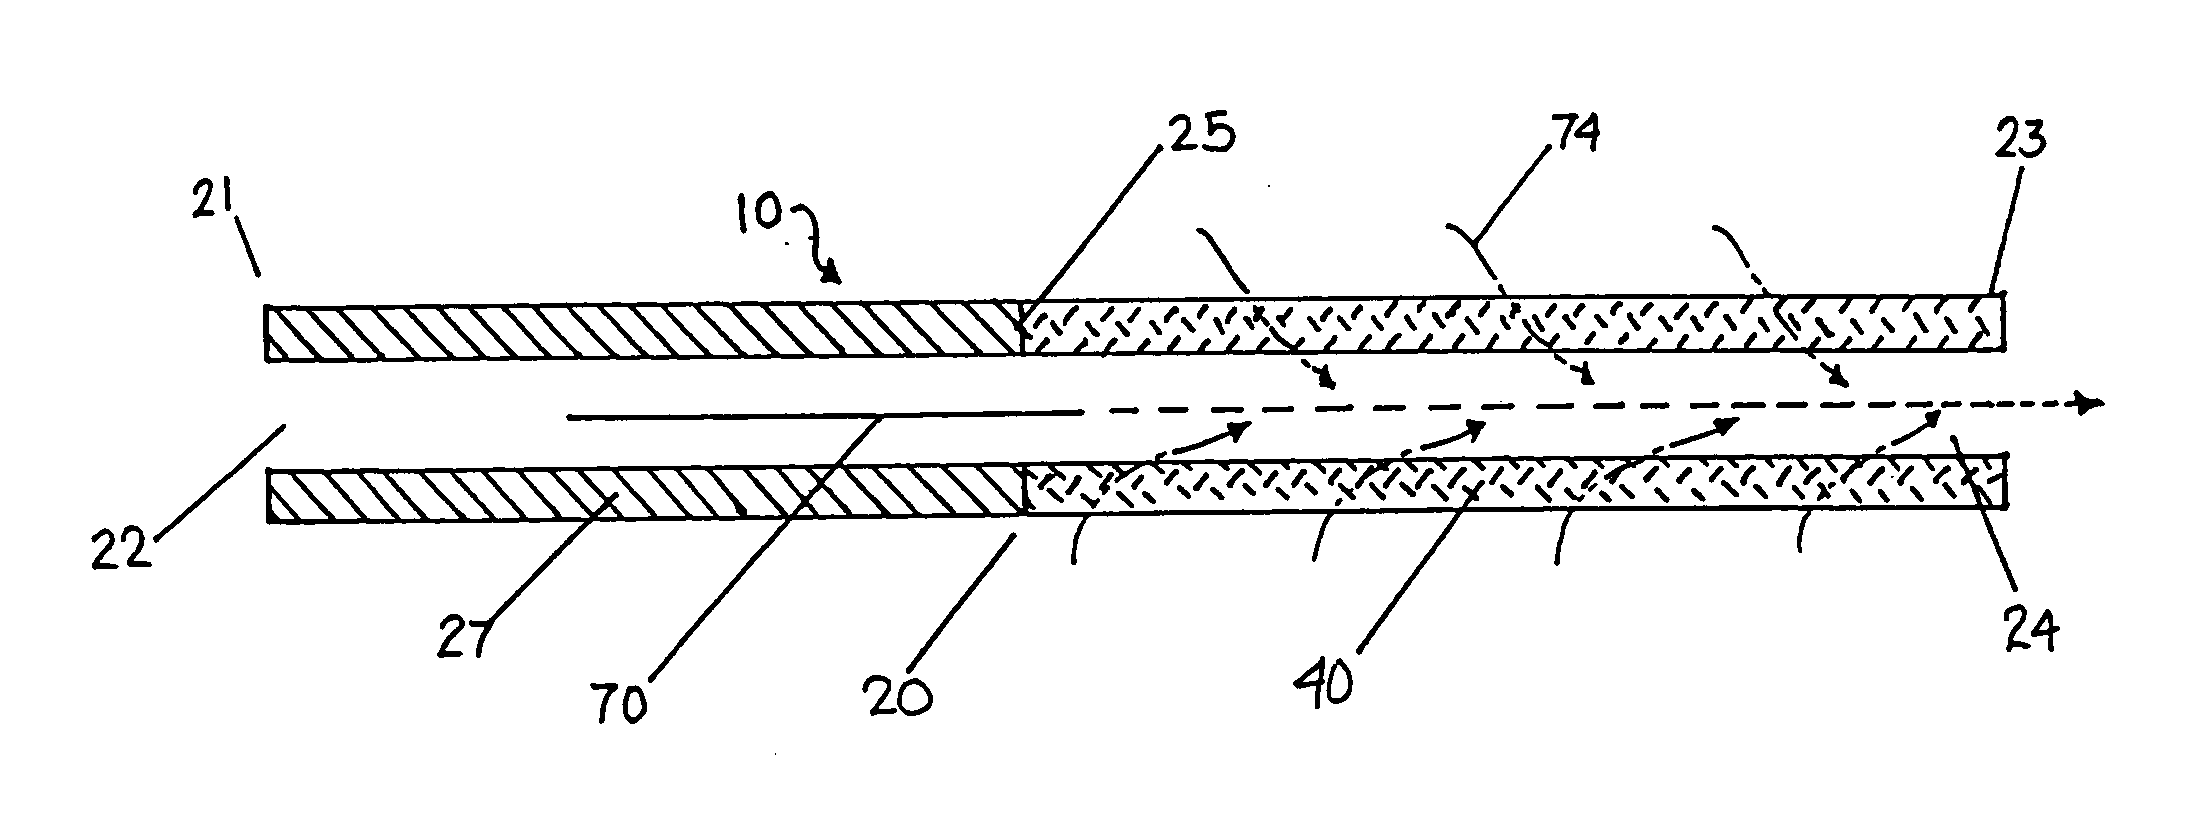 Catheter for modification of agent formulation